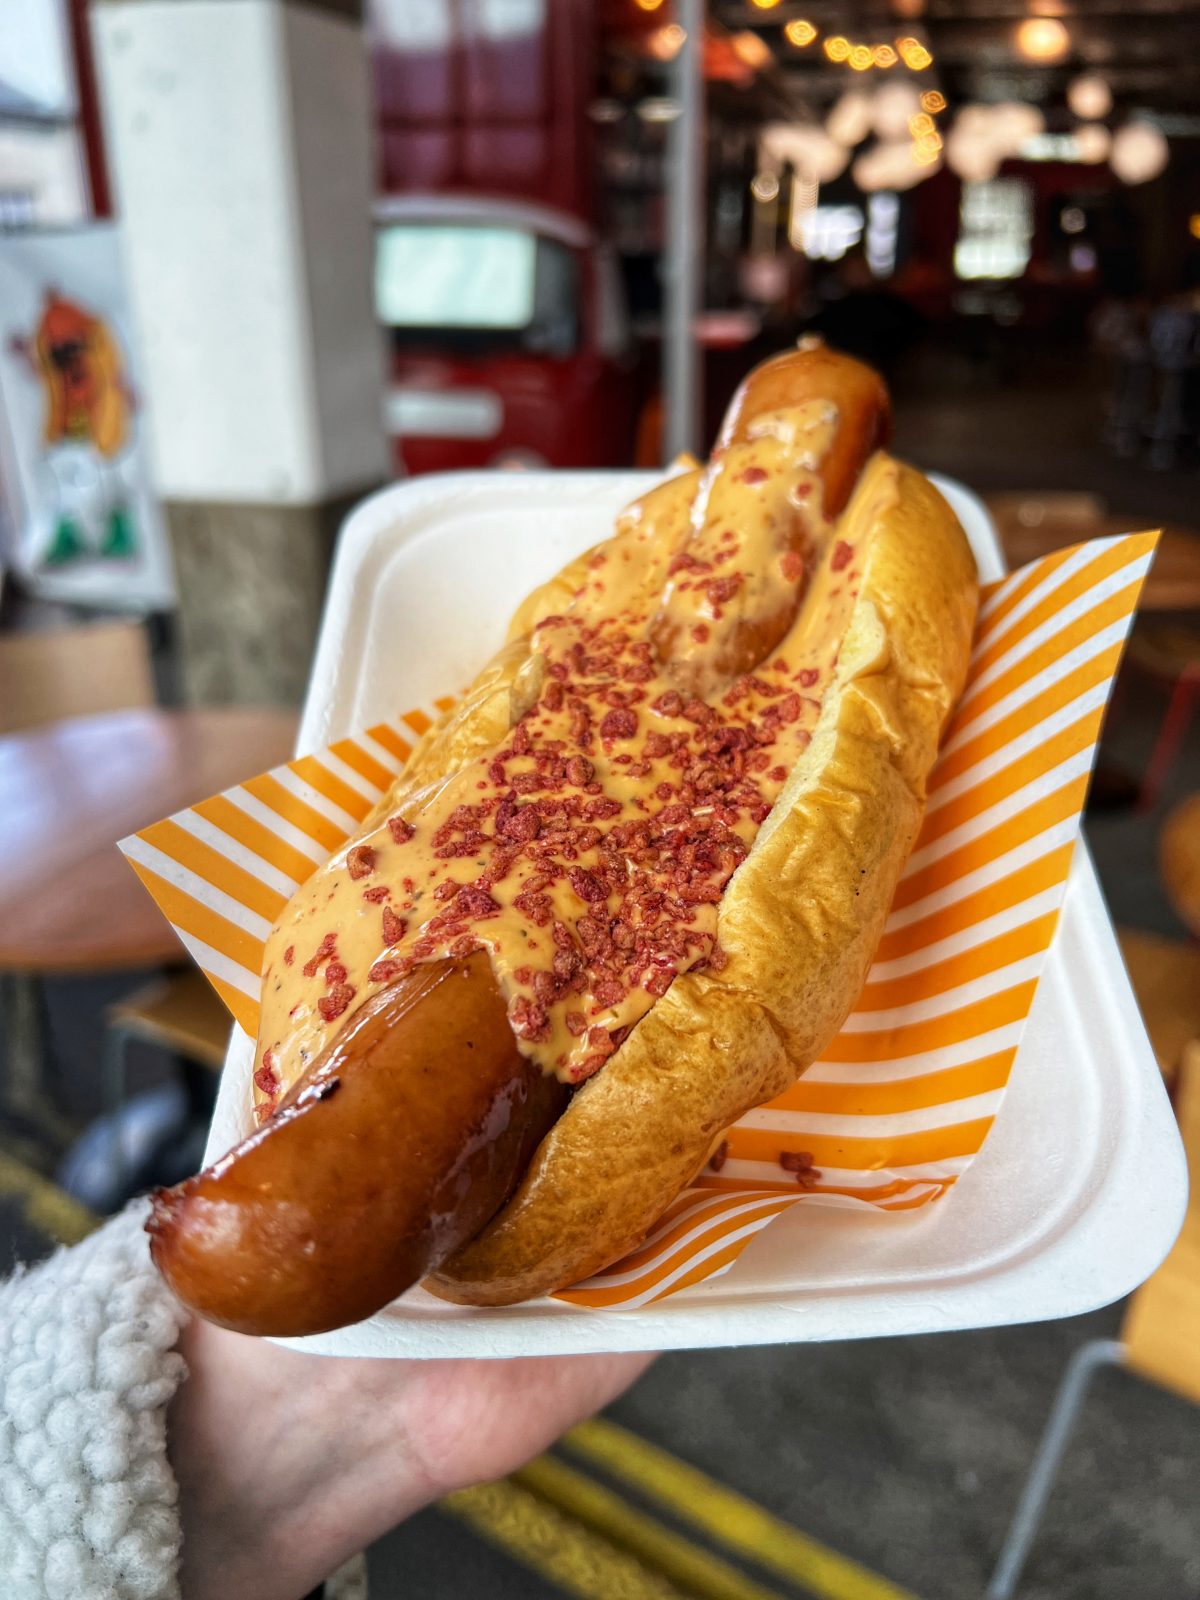 hot dog with bacon bits?